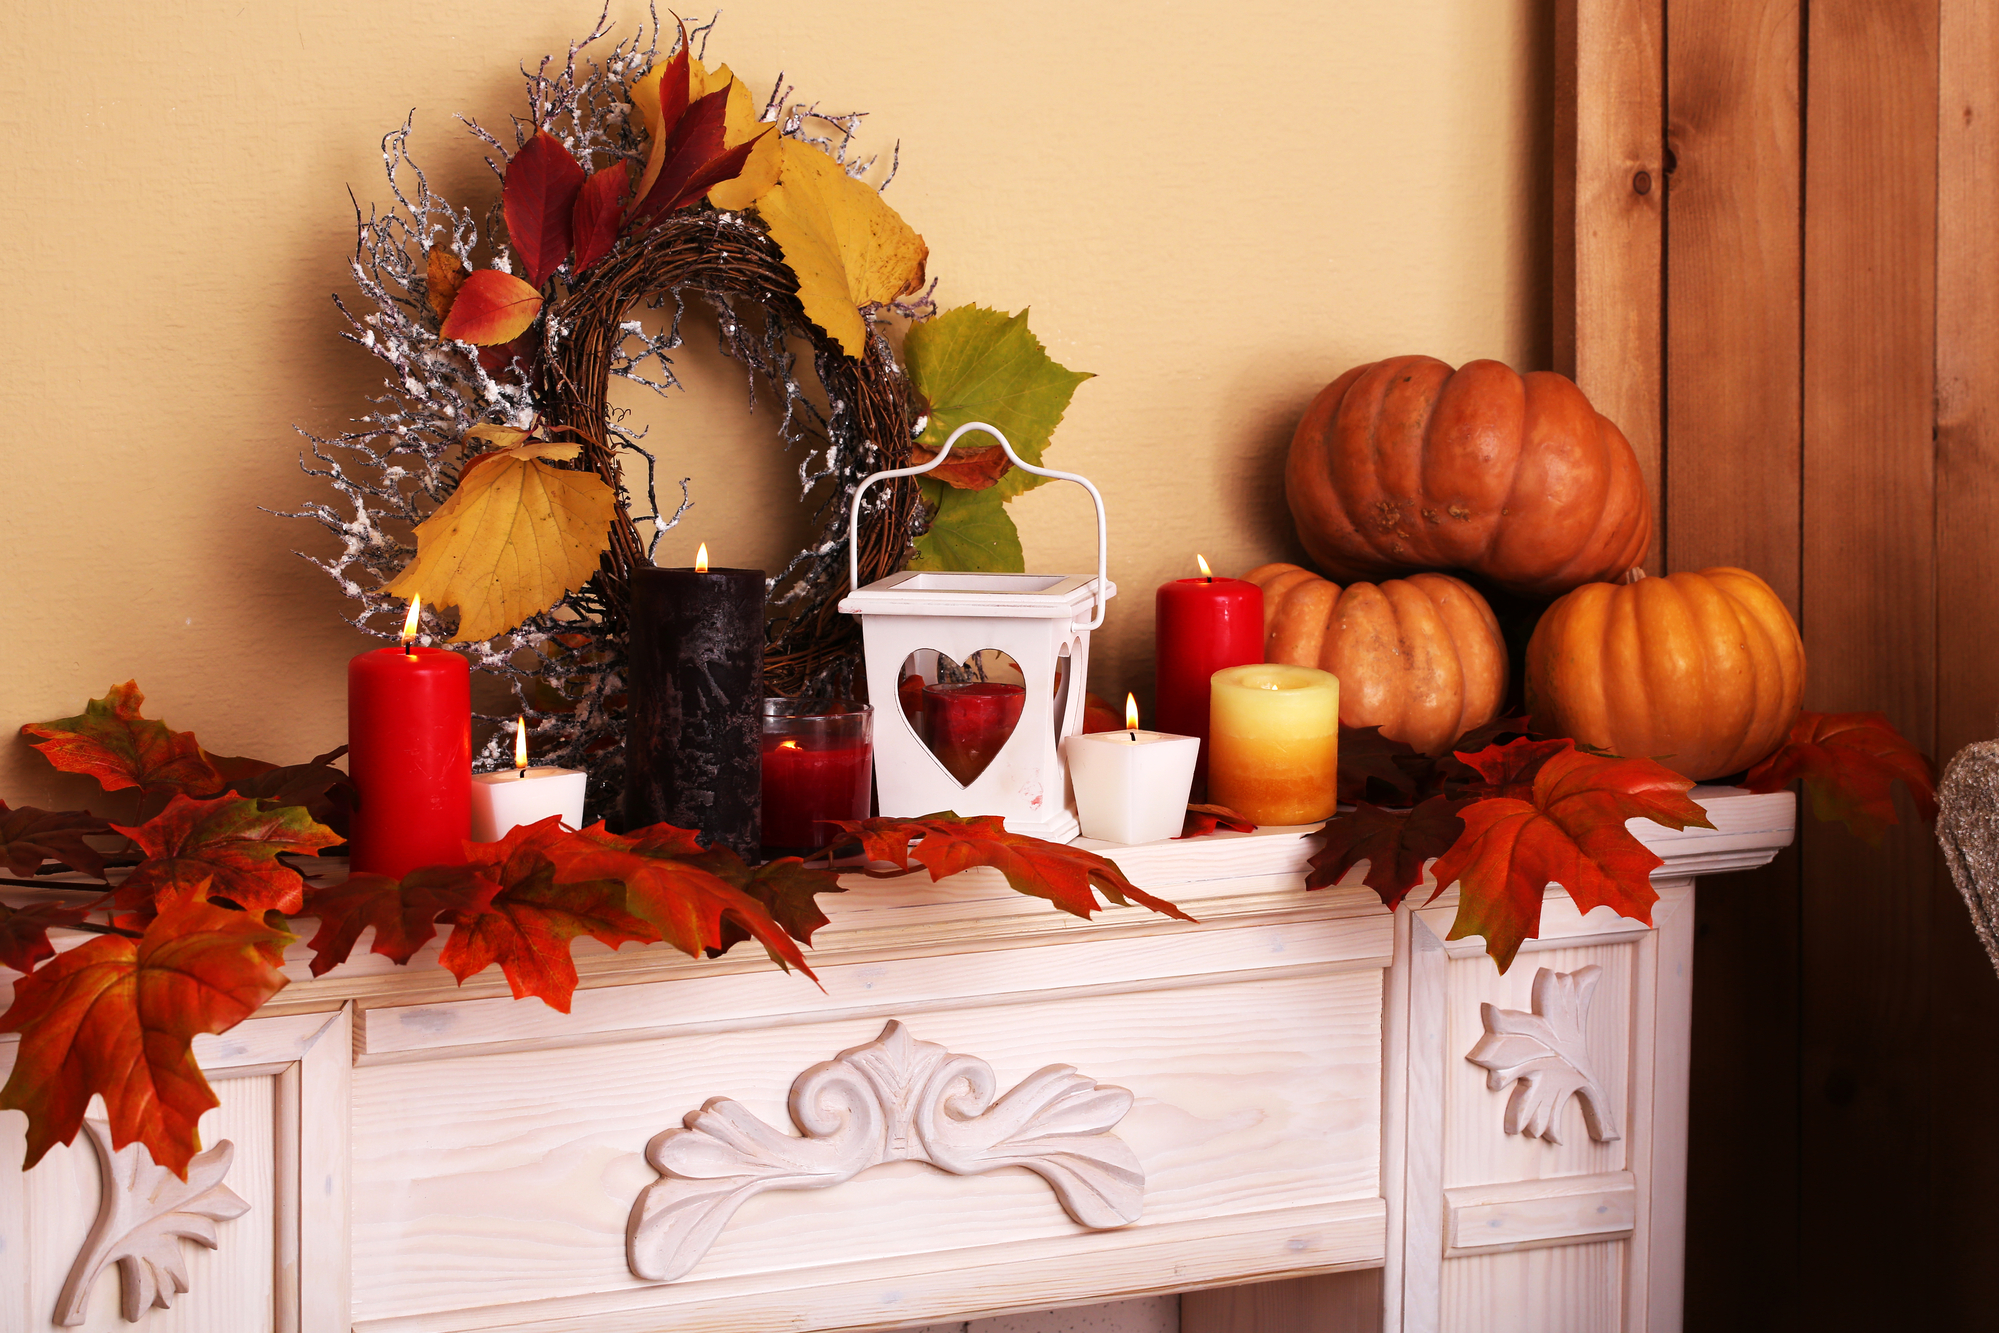 5 Fall Mantel Decorating Ideas That'll Make You Look Like a Pro 2